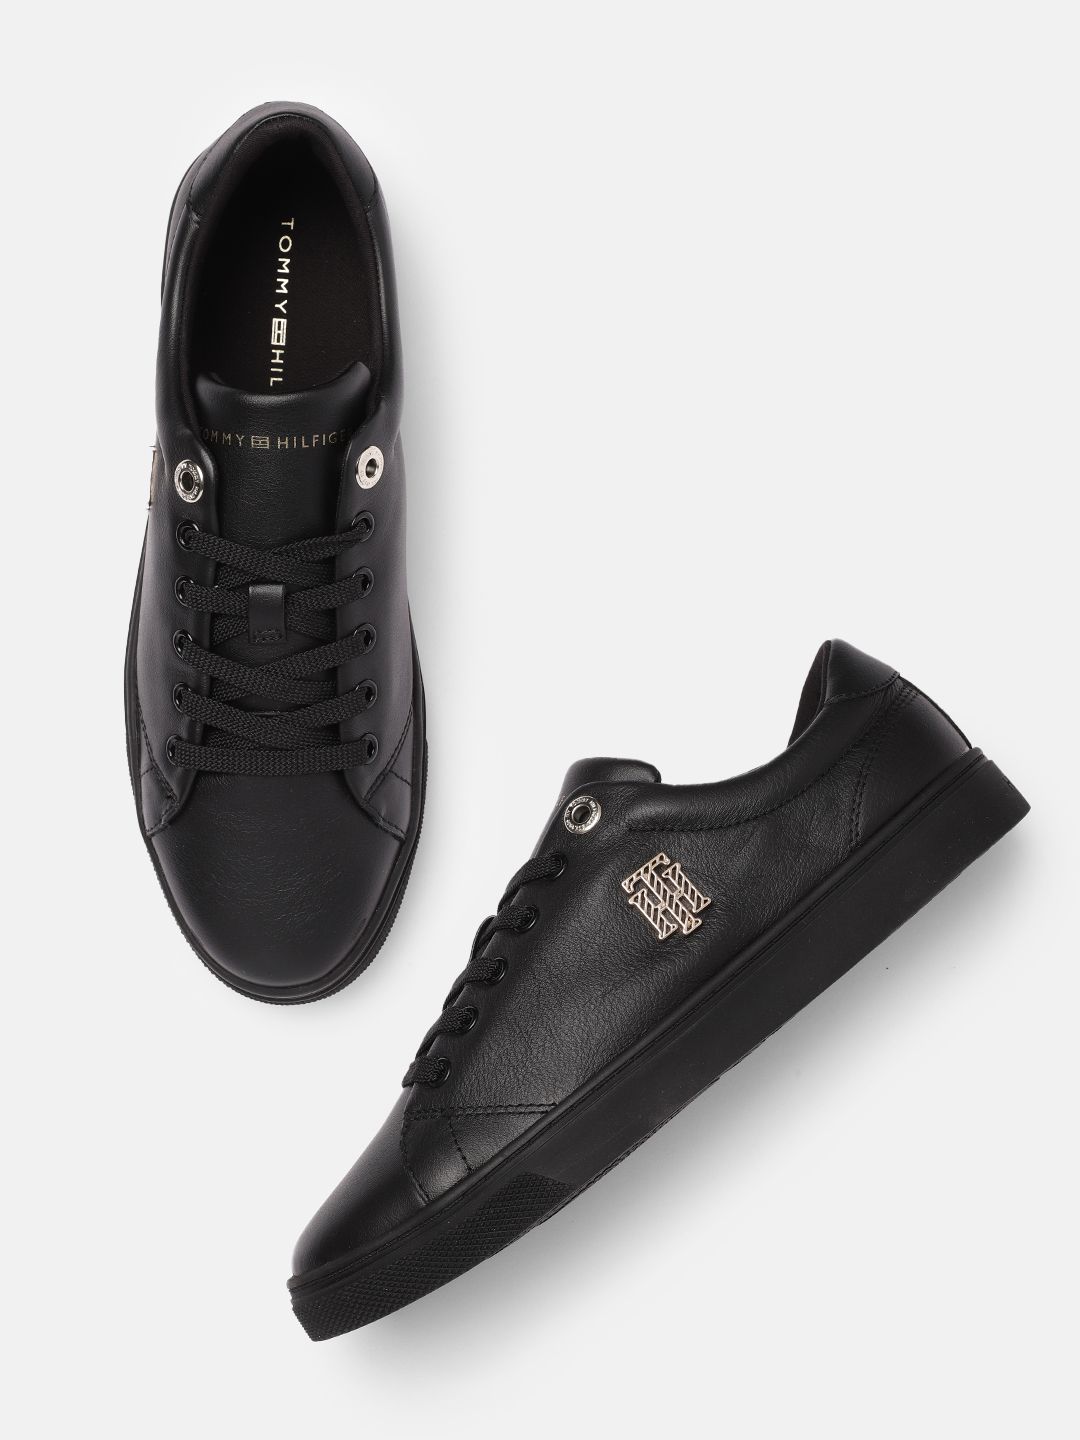 Tommy Hilfiger Women Black Solid Leather Regular Sneakers With Brand Logo Applique Detail Price in India